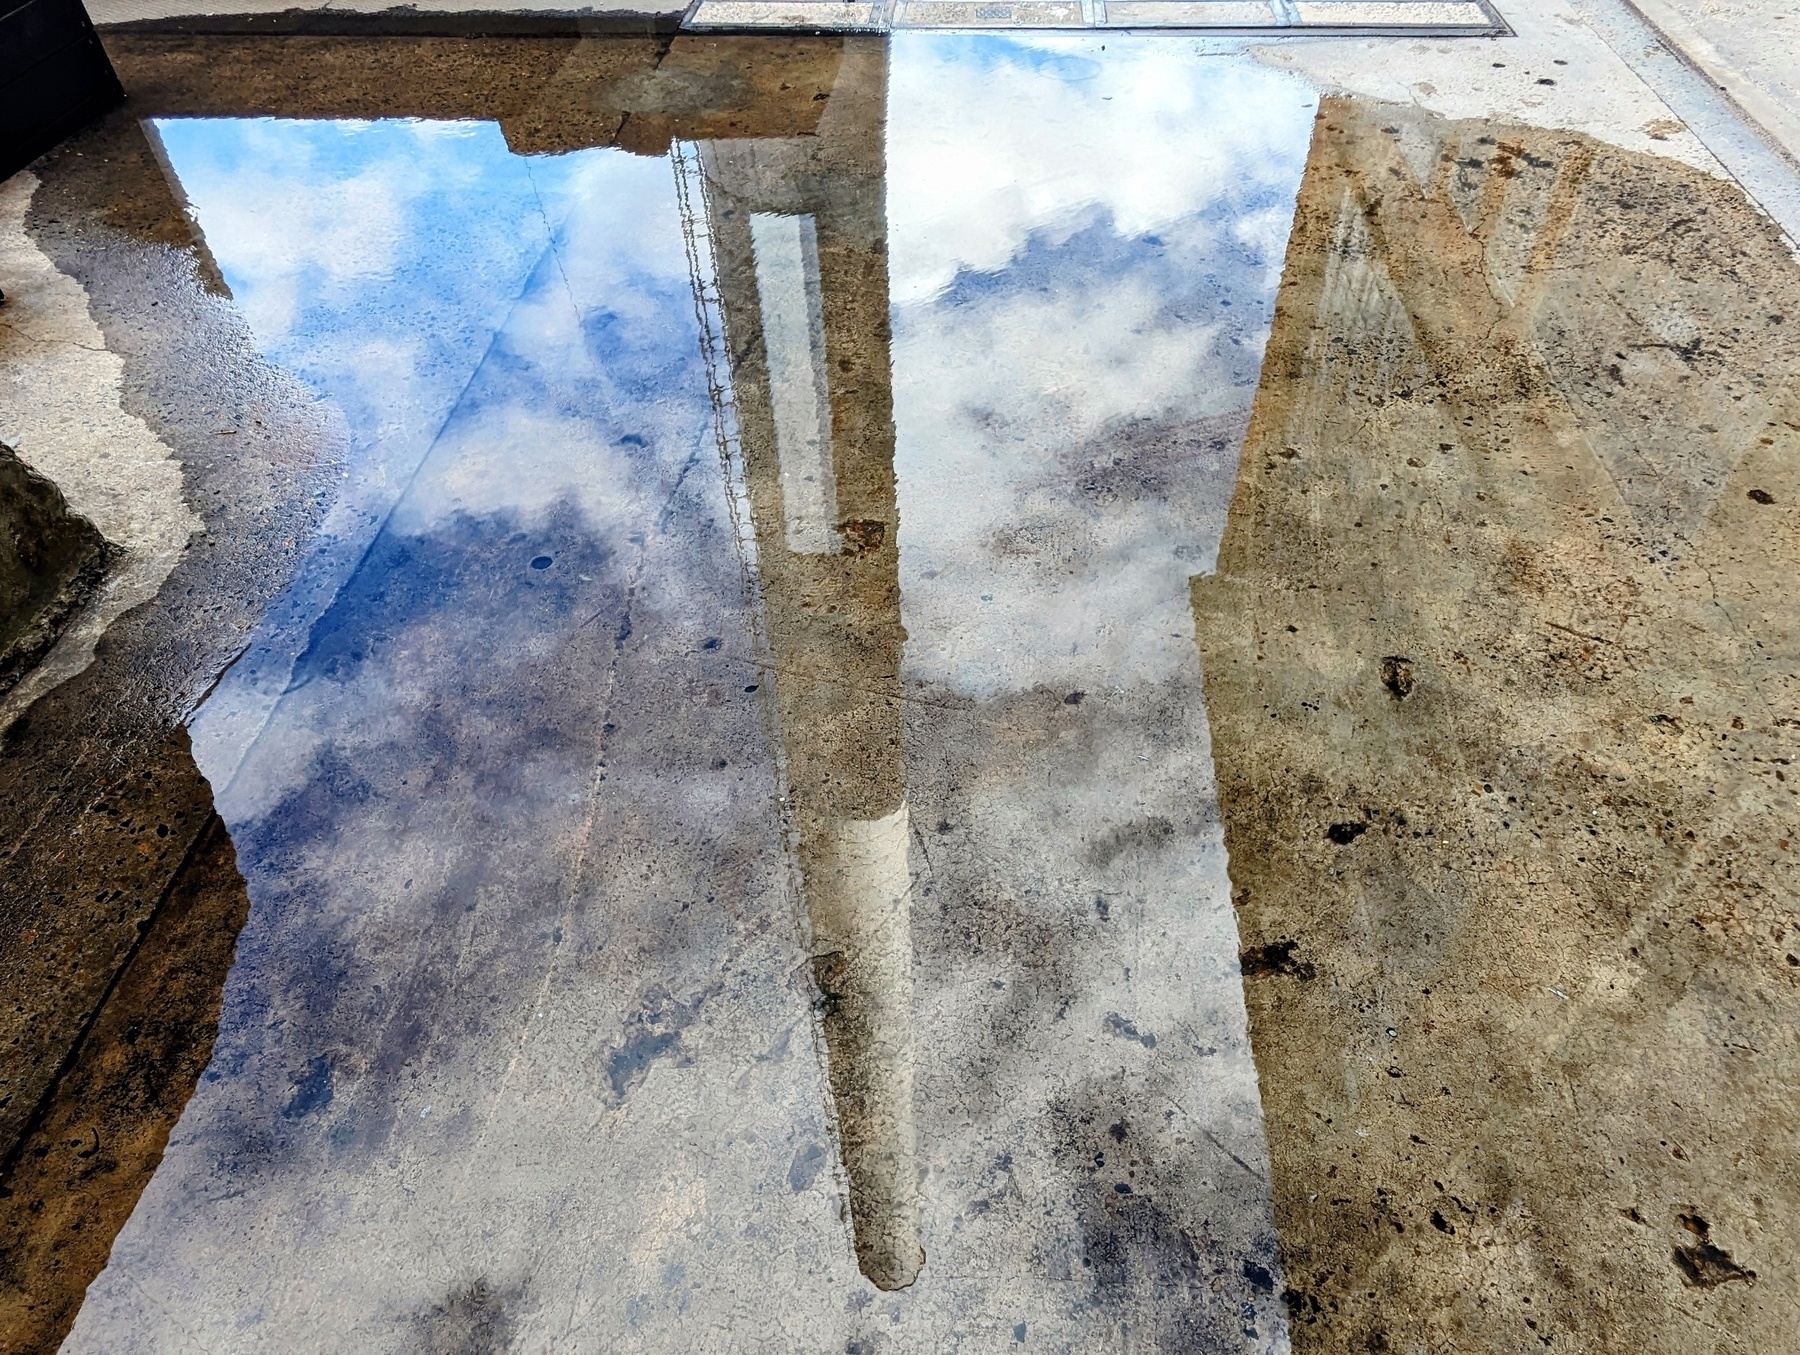 A tall power station chimney, reflected upside down in a puddle.